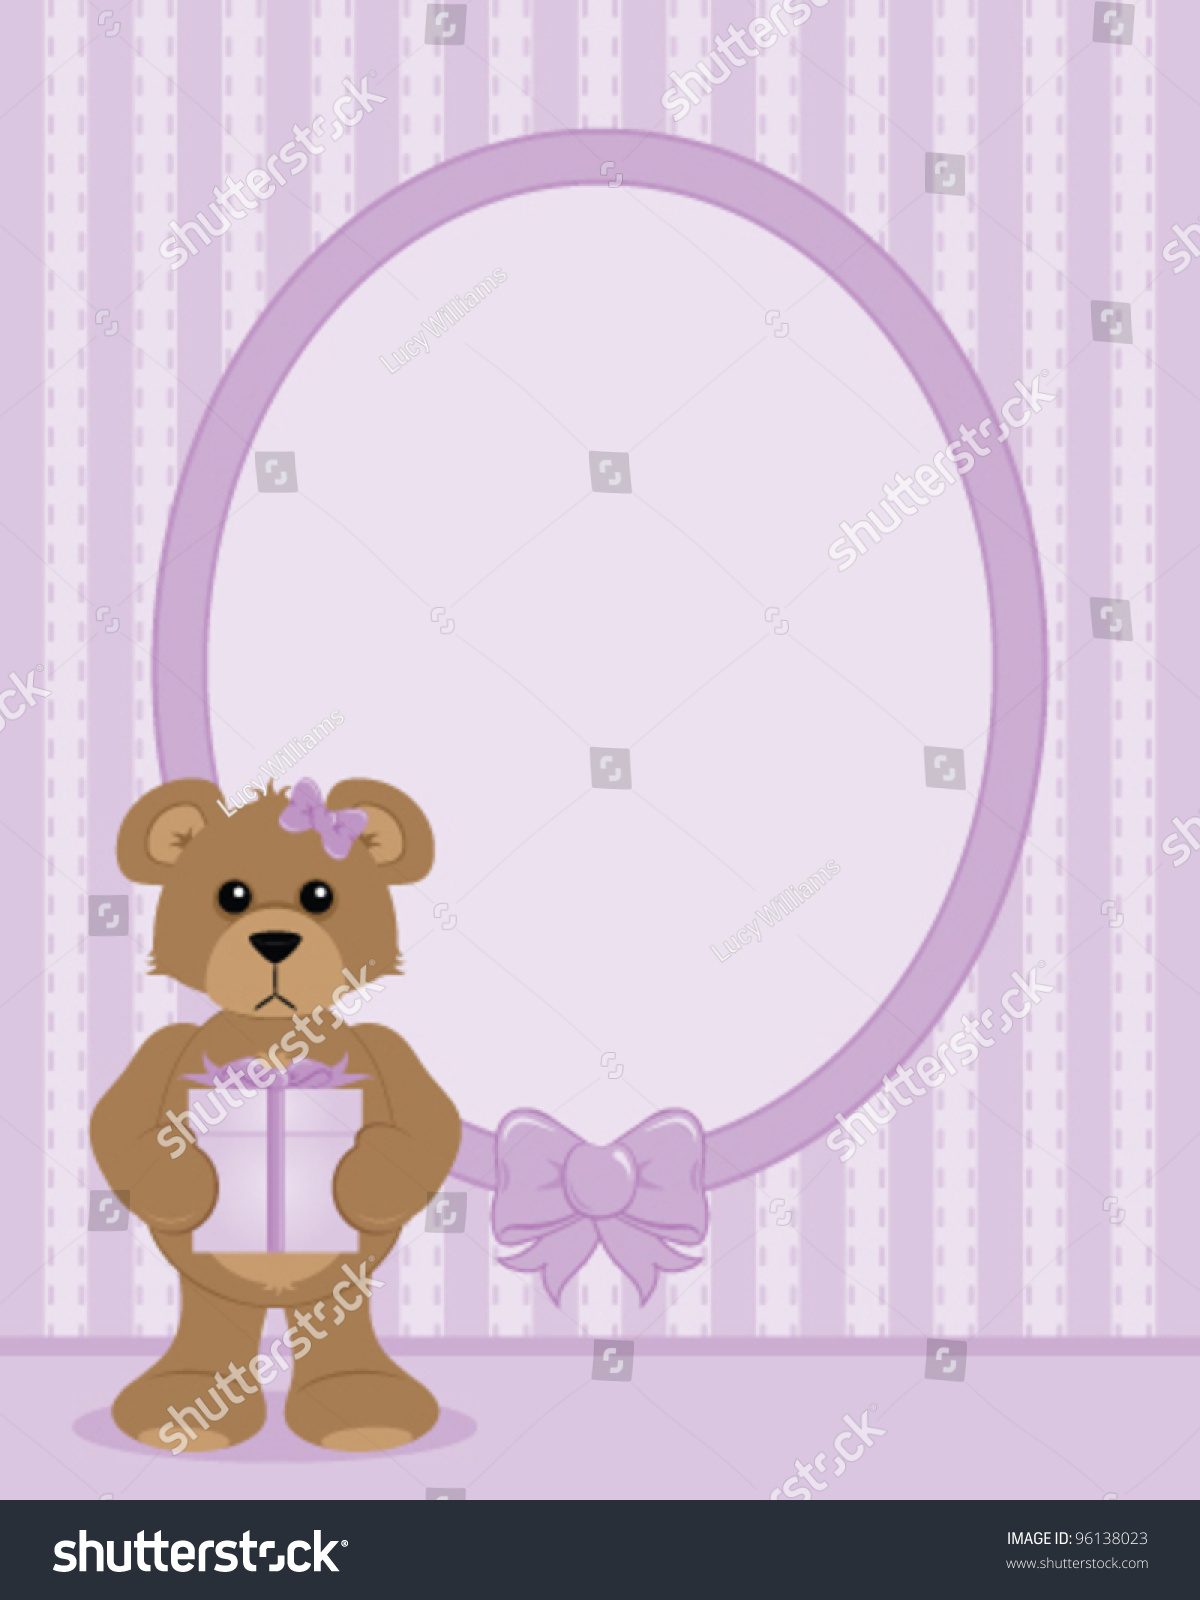 teddy bear holding picture frame